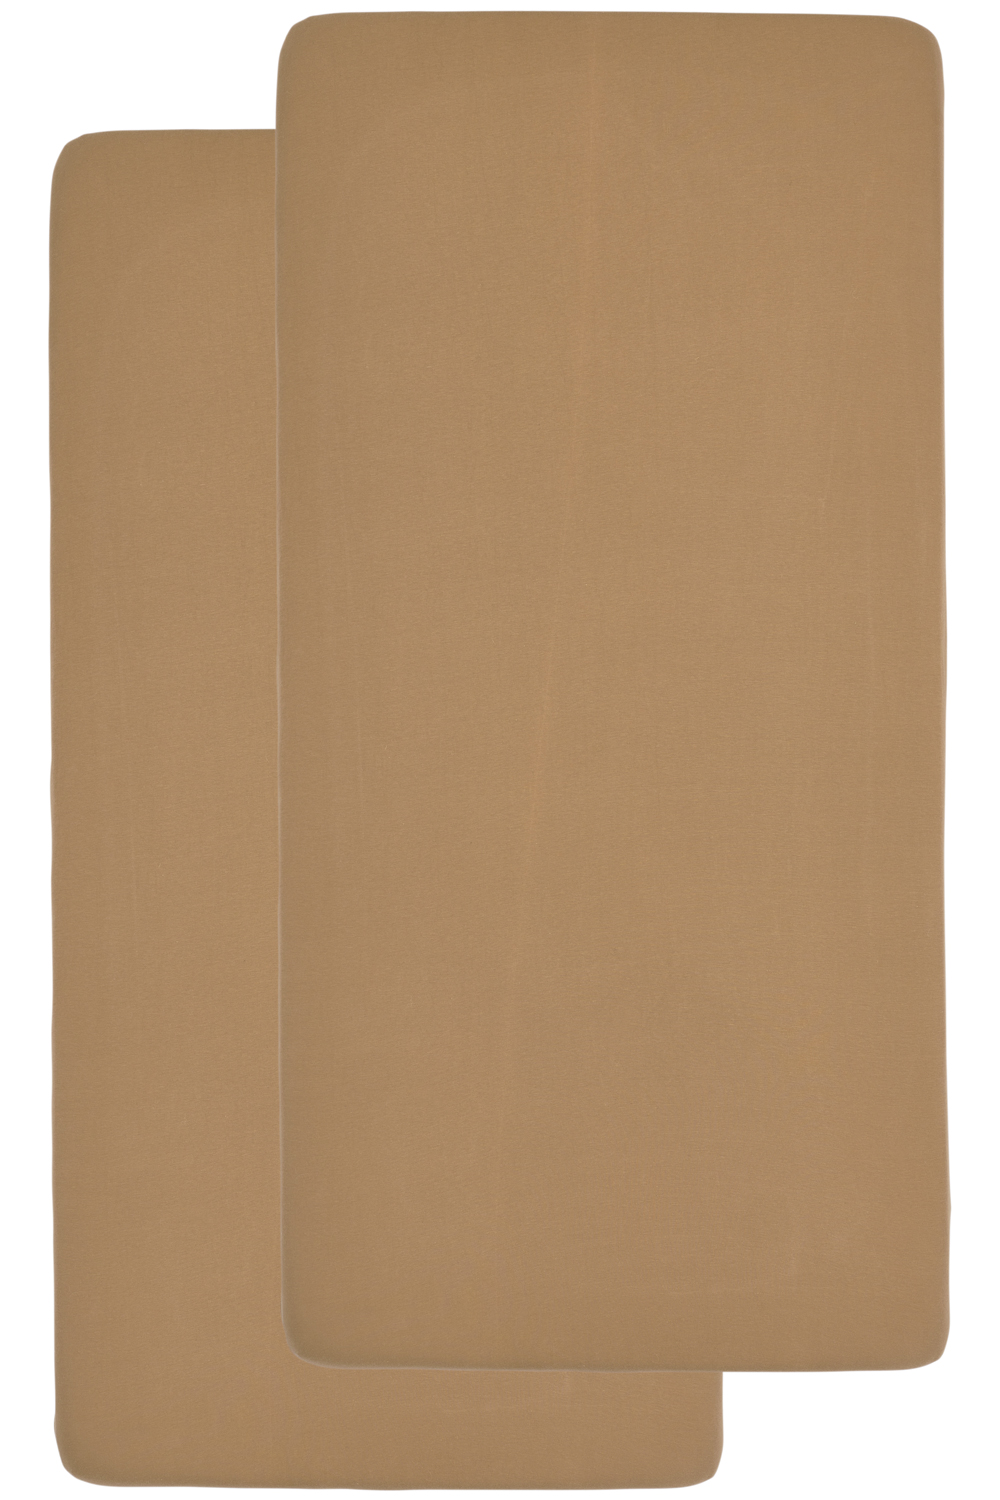 Fitted sheet juniorbed 2-pack Uni - toffee - 70x140/150cm